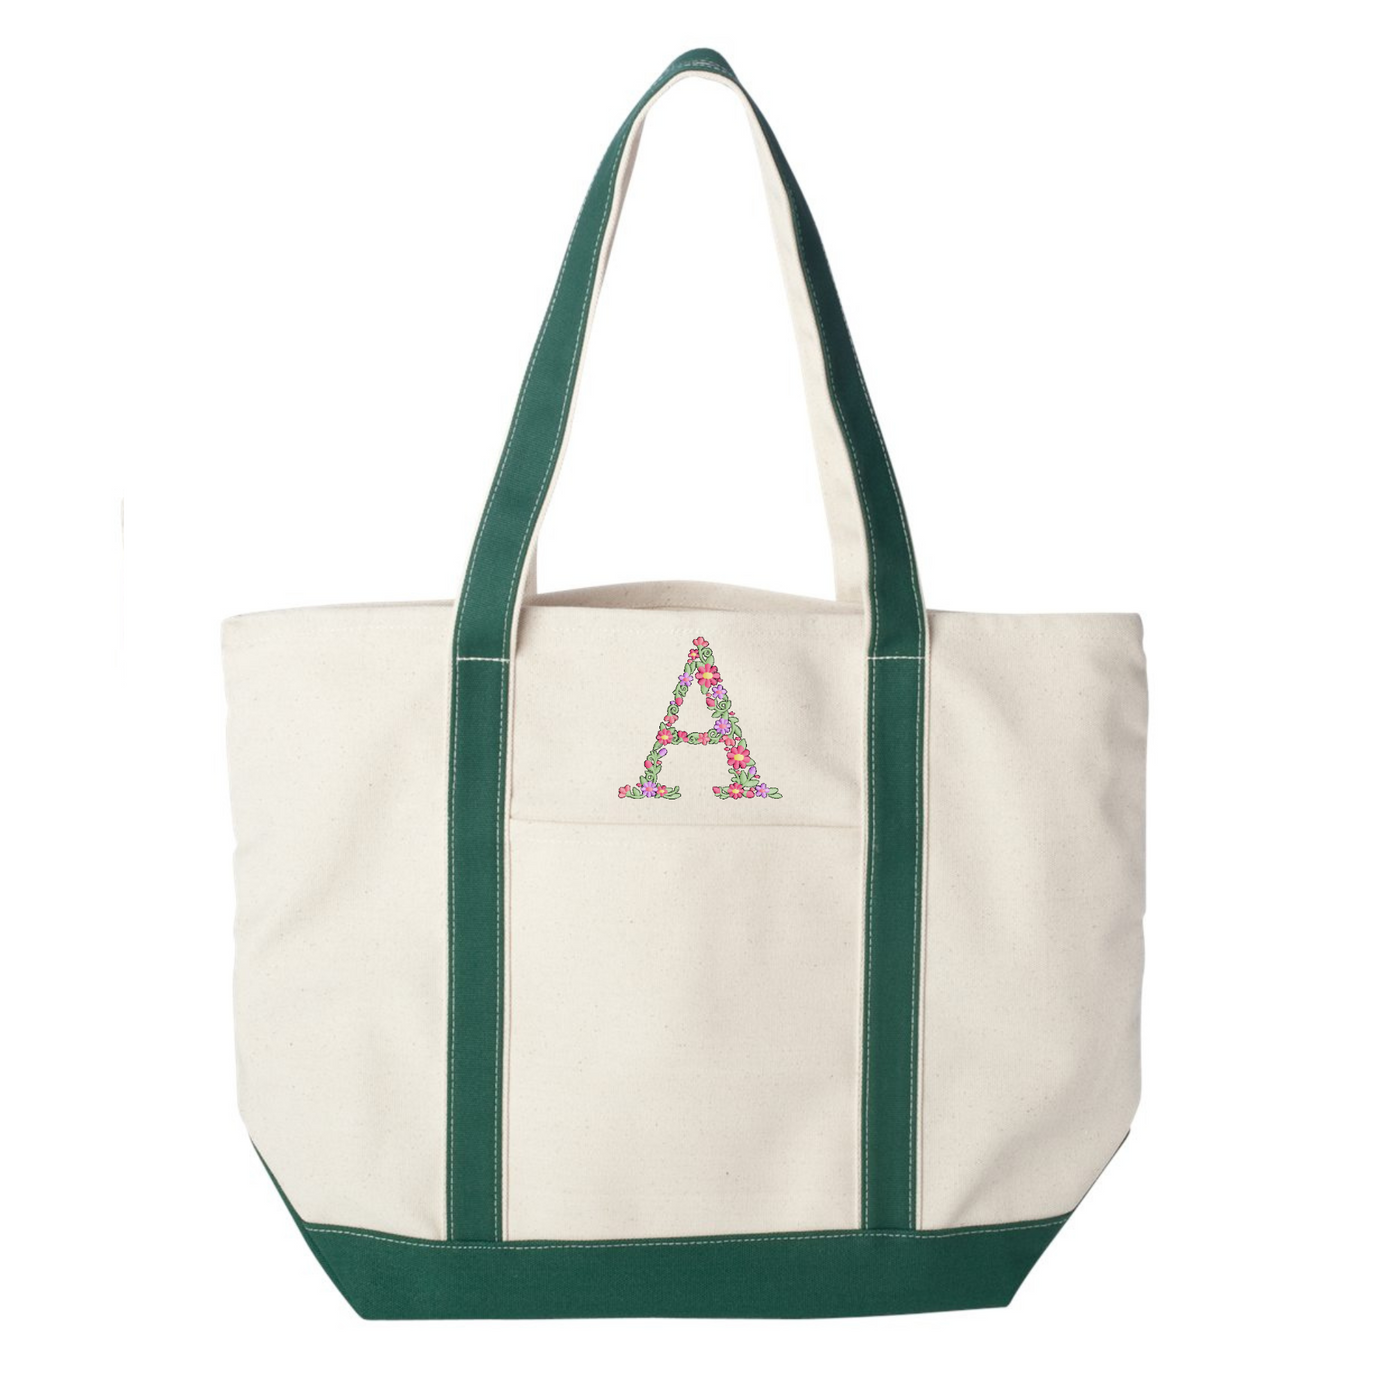 'Floral Initial' Canvas Boat Tote